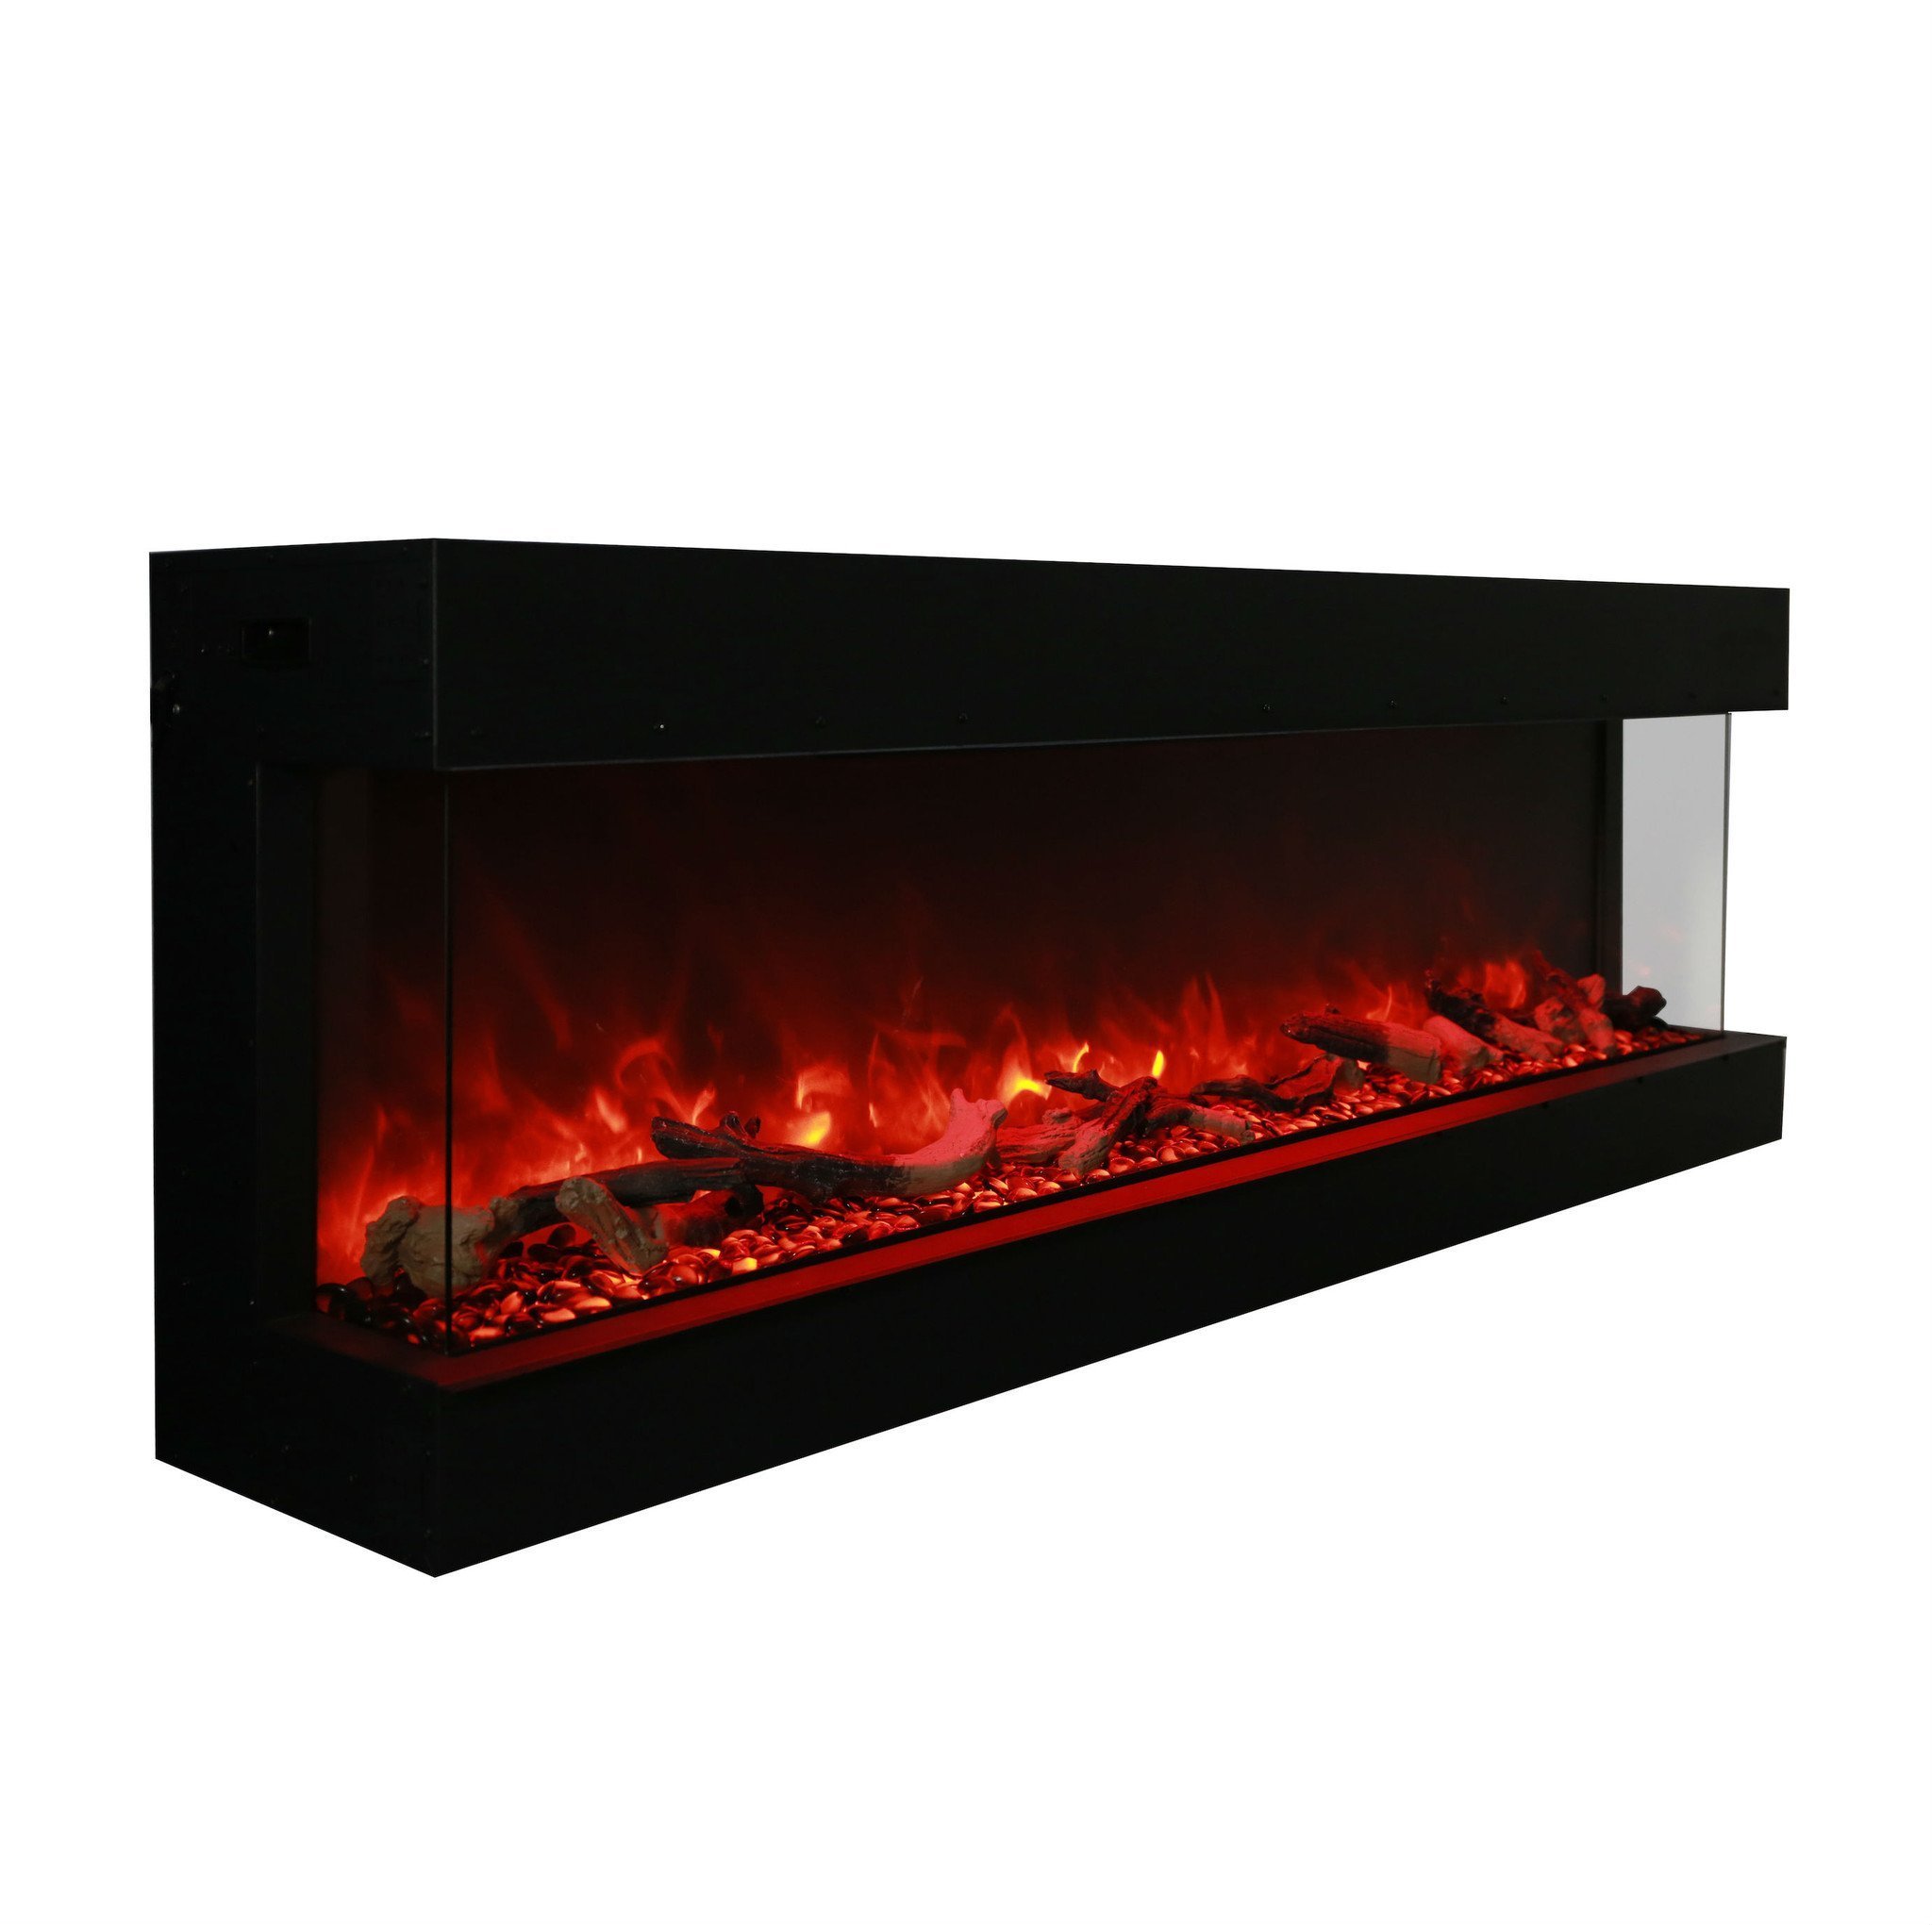 30 Inch Electric Fireplace Awesome Outdoor Electric Fireplaces On Sale Modern Blaze